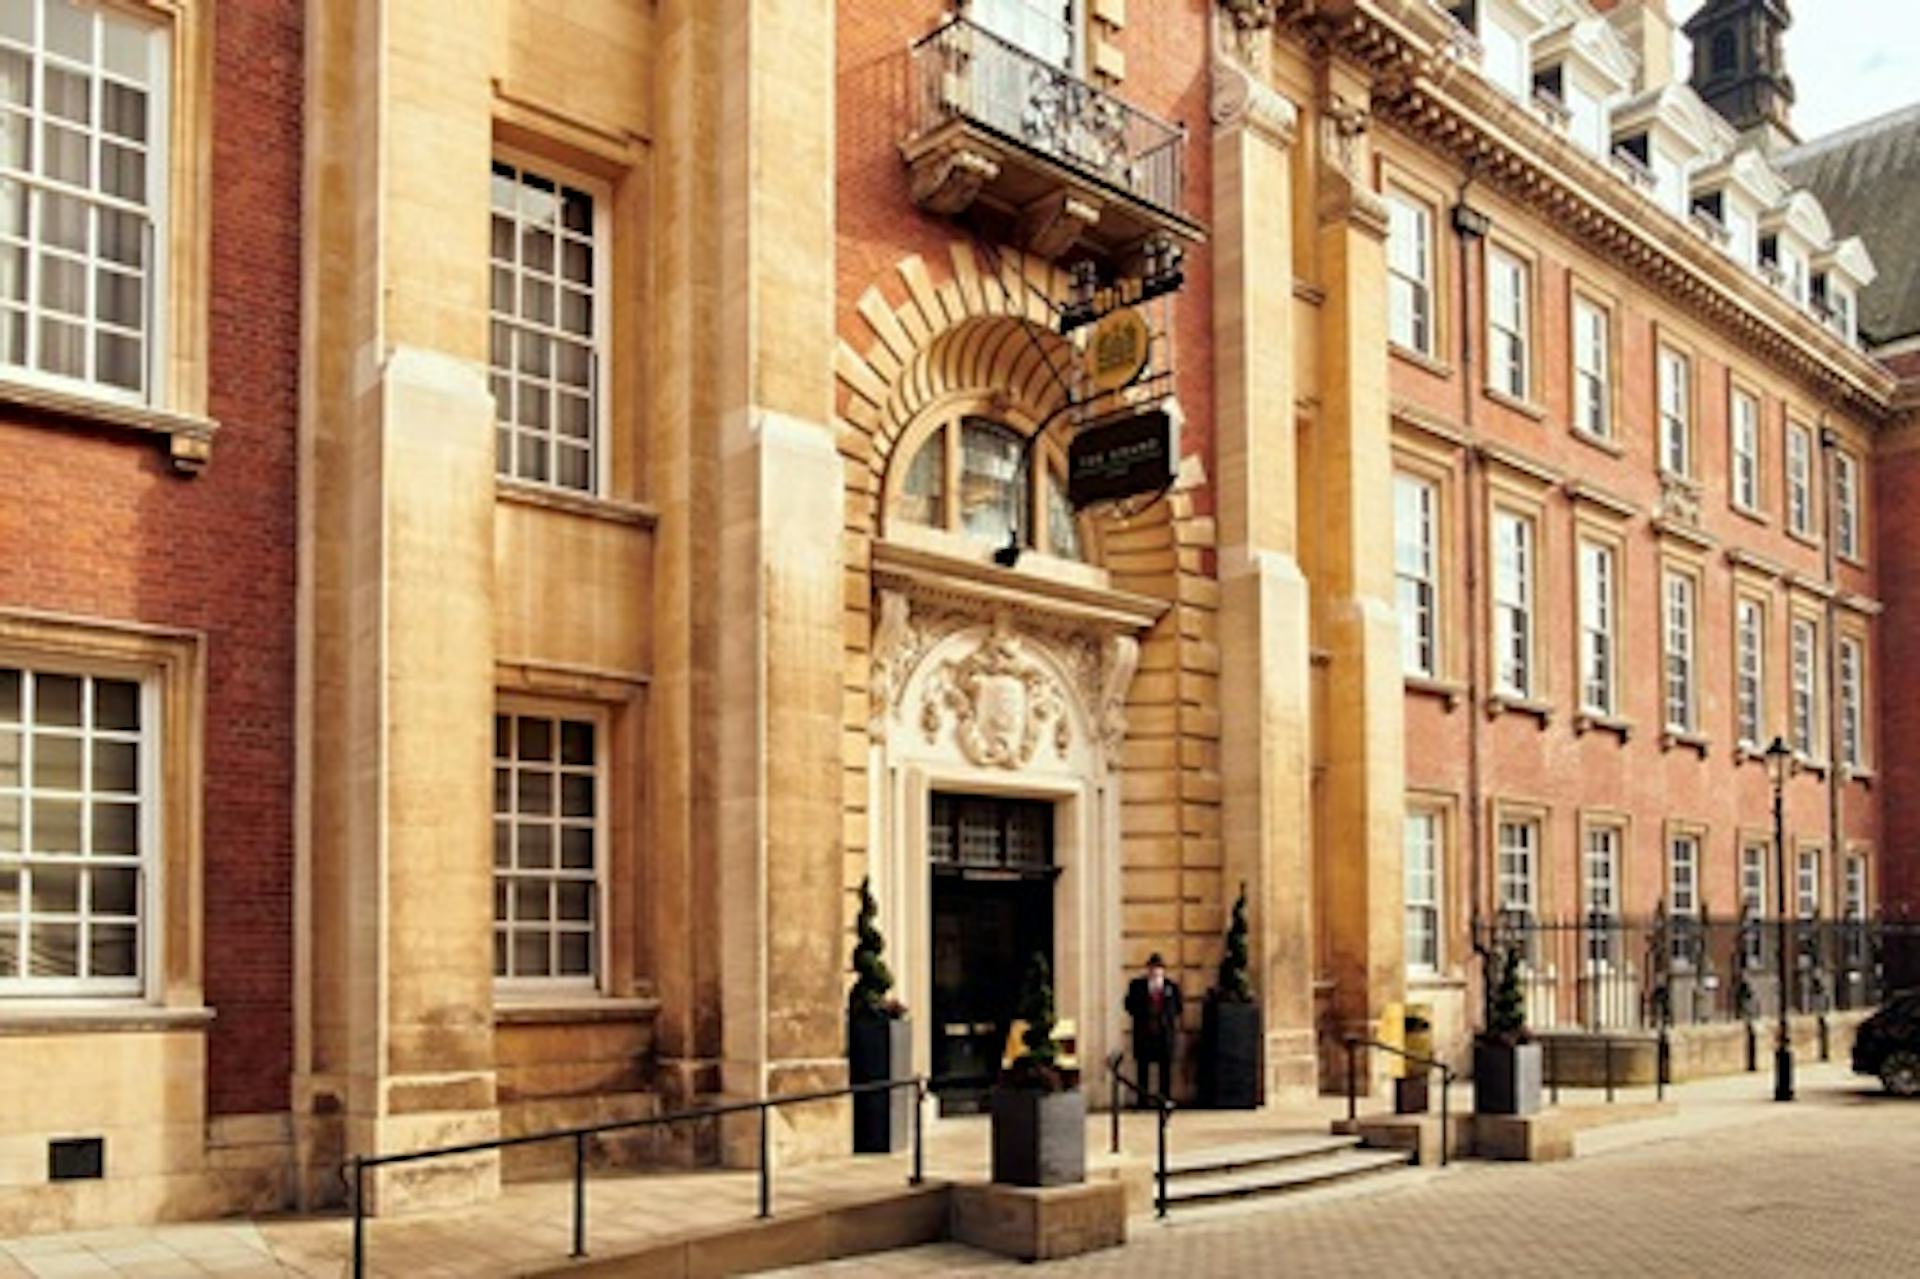 One Night Luxury Break for Two with Afternoon Tea at the 5* Grand Hotel York